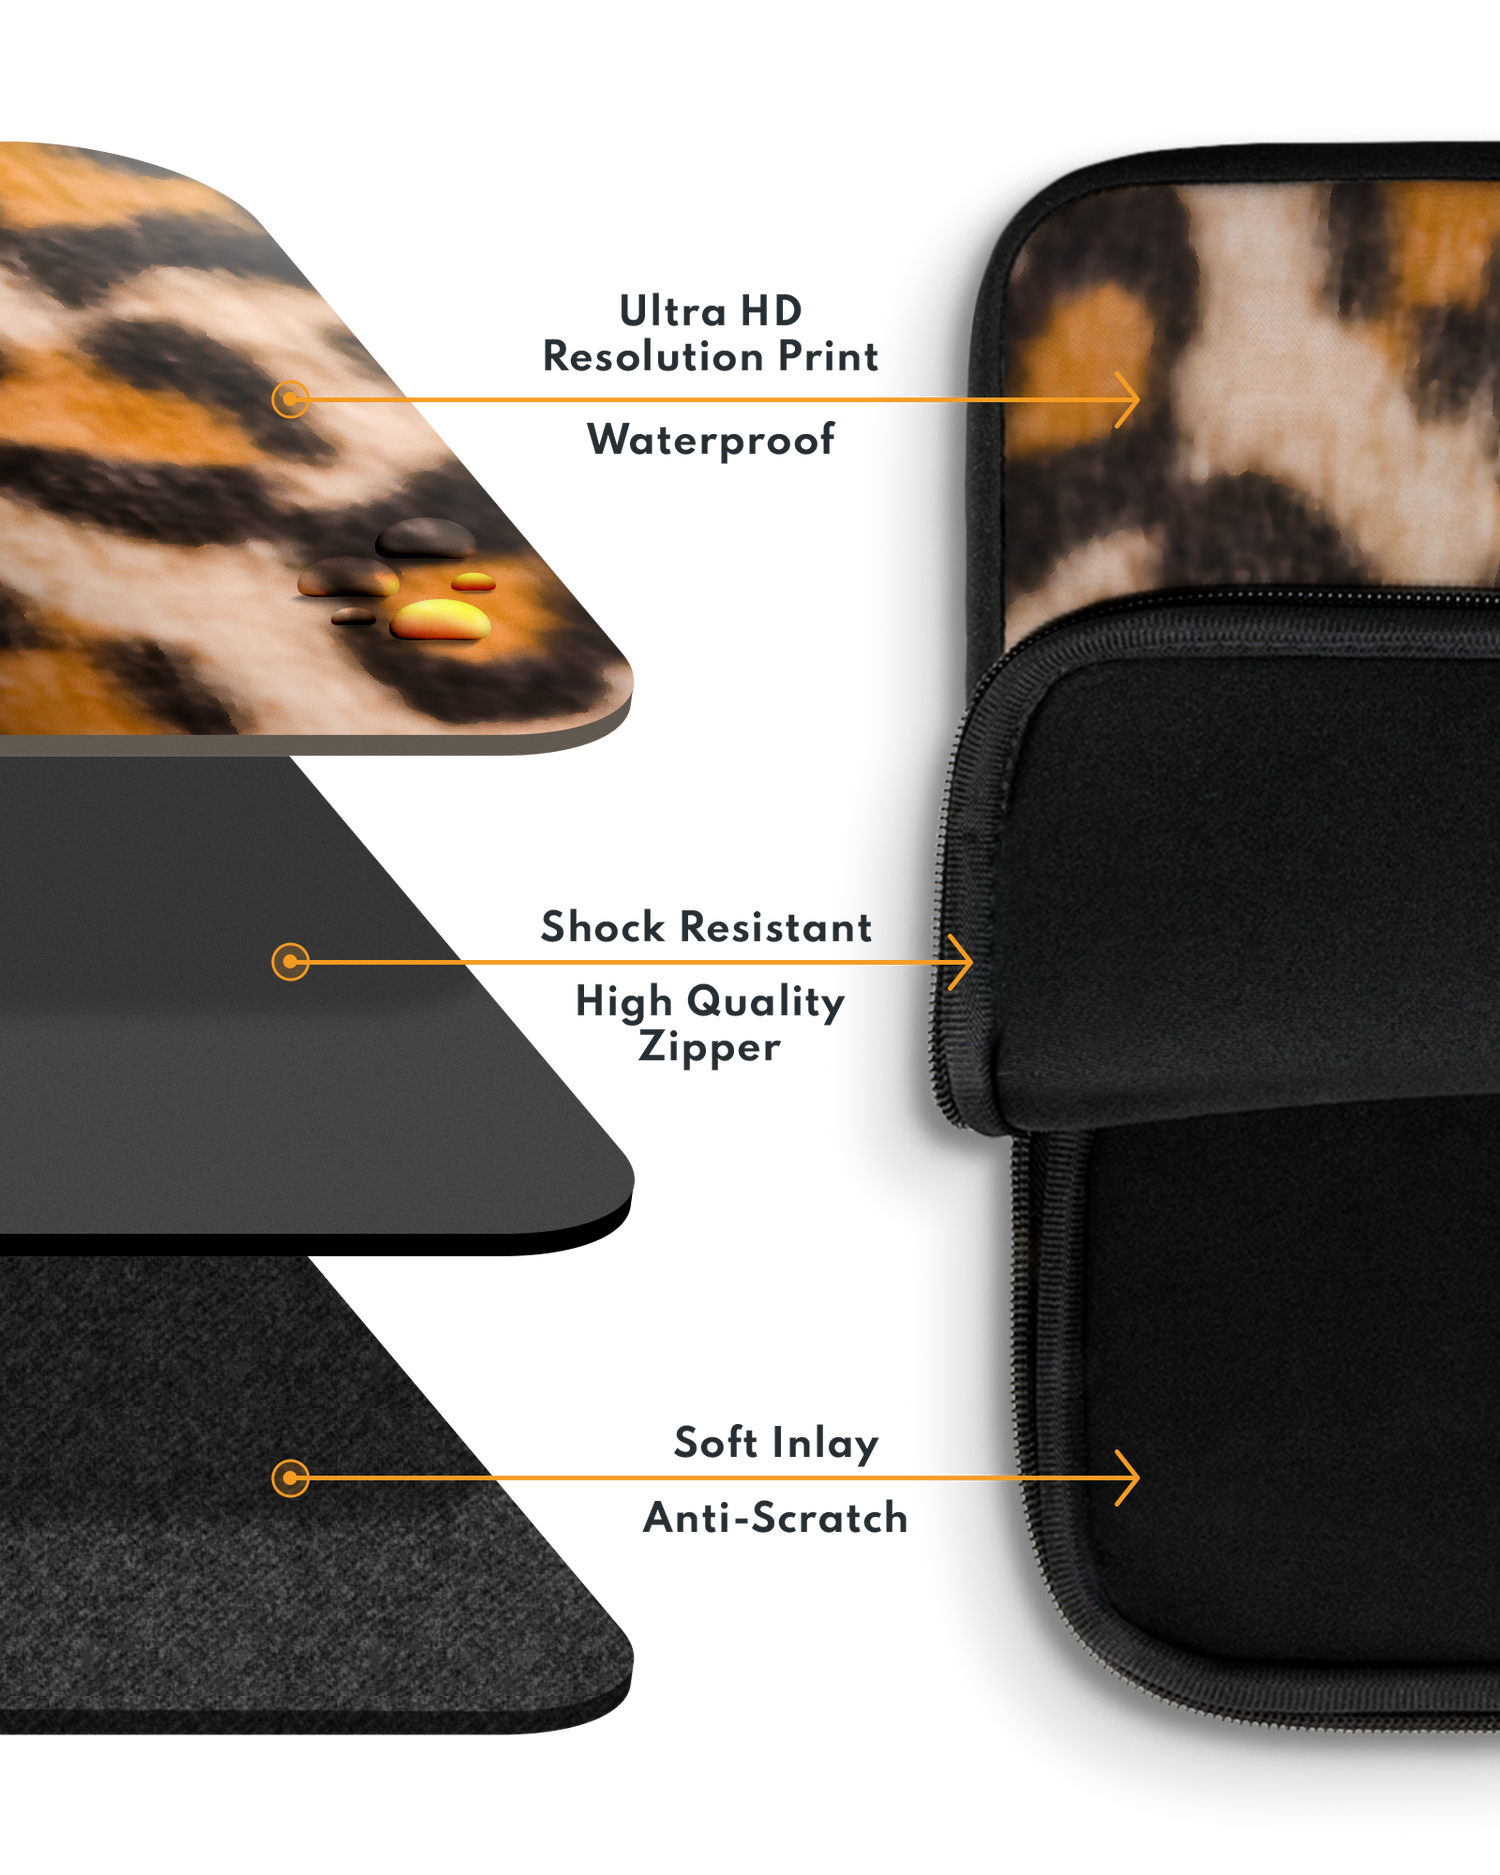 Leopard Pattern Laptop Case 13 inch with soft inner lining